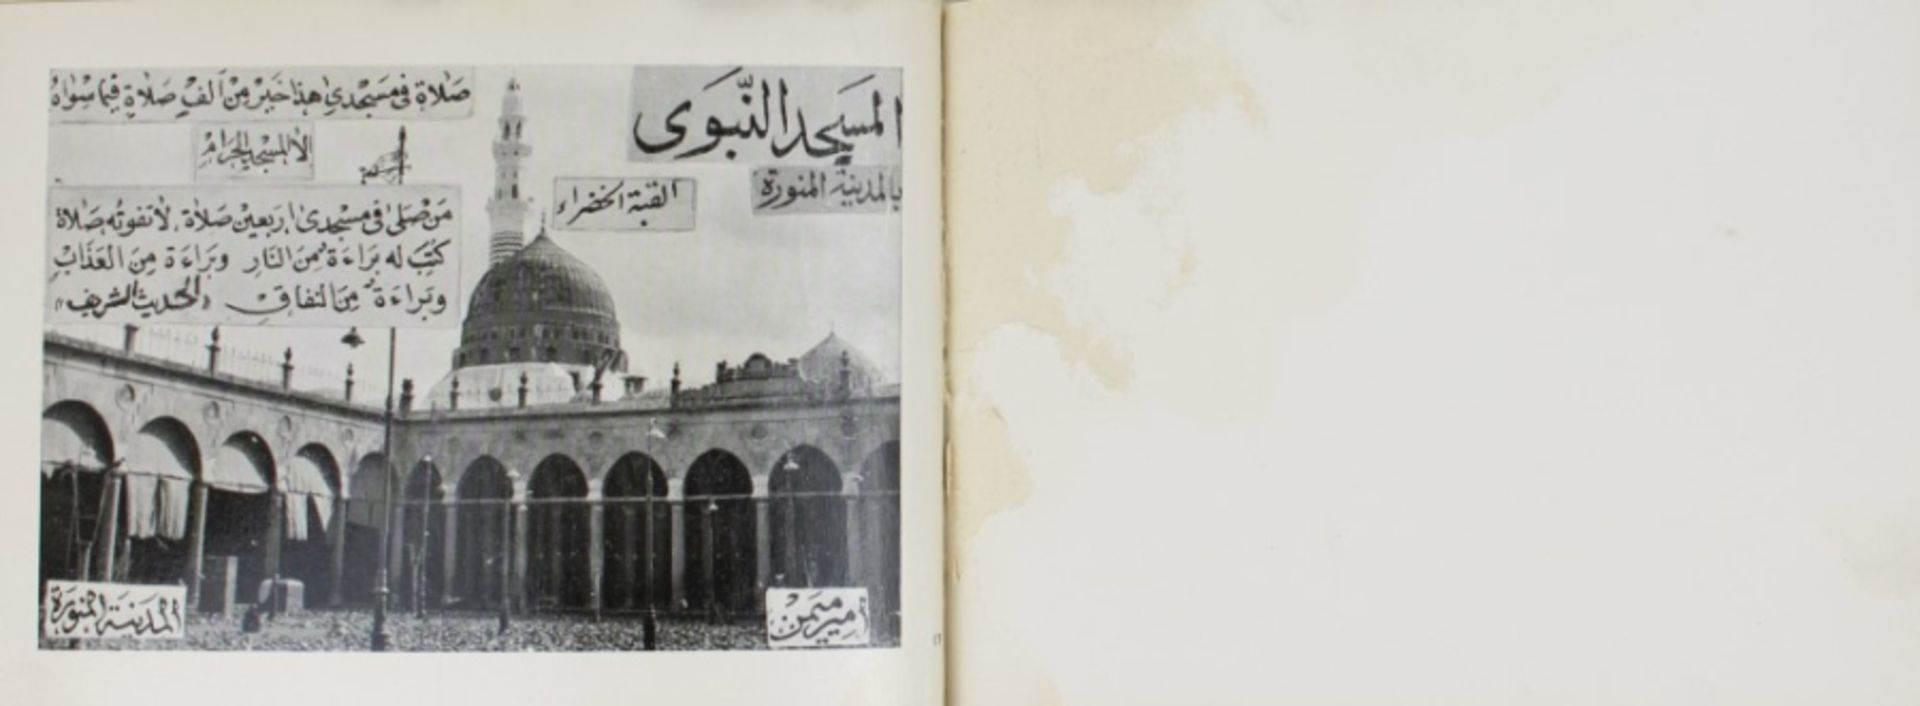 1930 Album with photographs of Mecca - Image 15 of 24